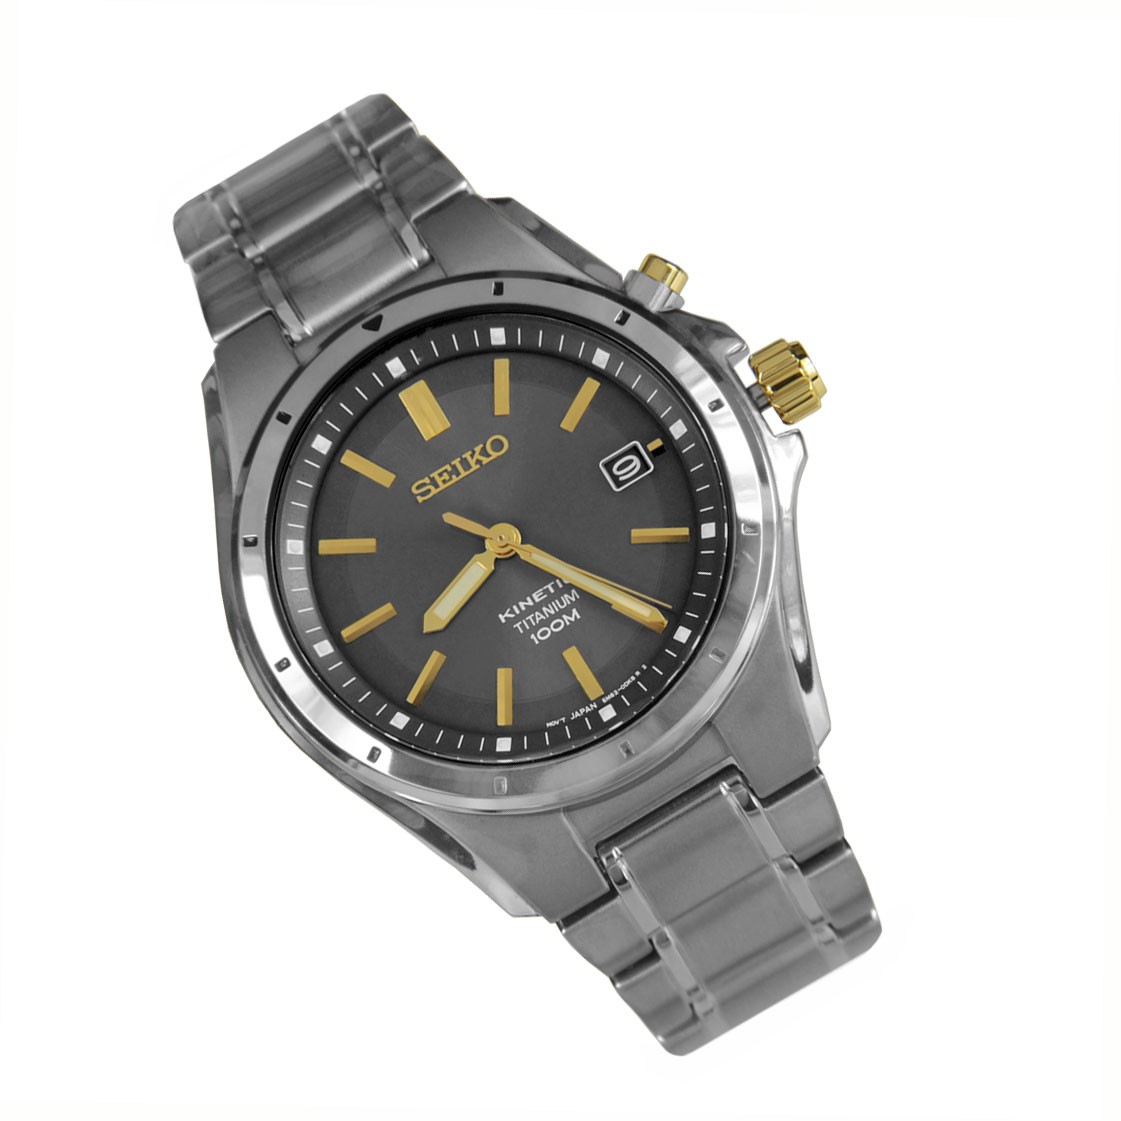 10 Best Seiko Kinetic Watches For Men - The Watch Blog